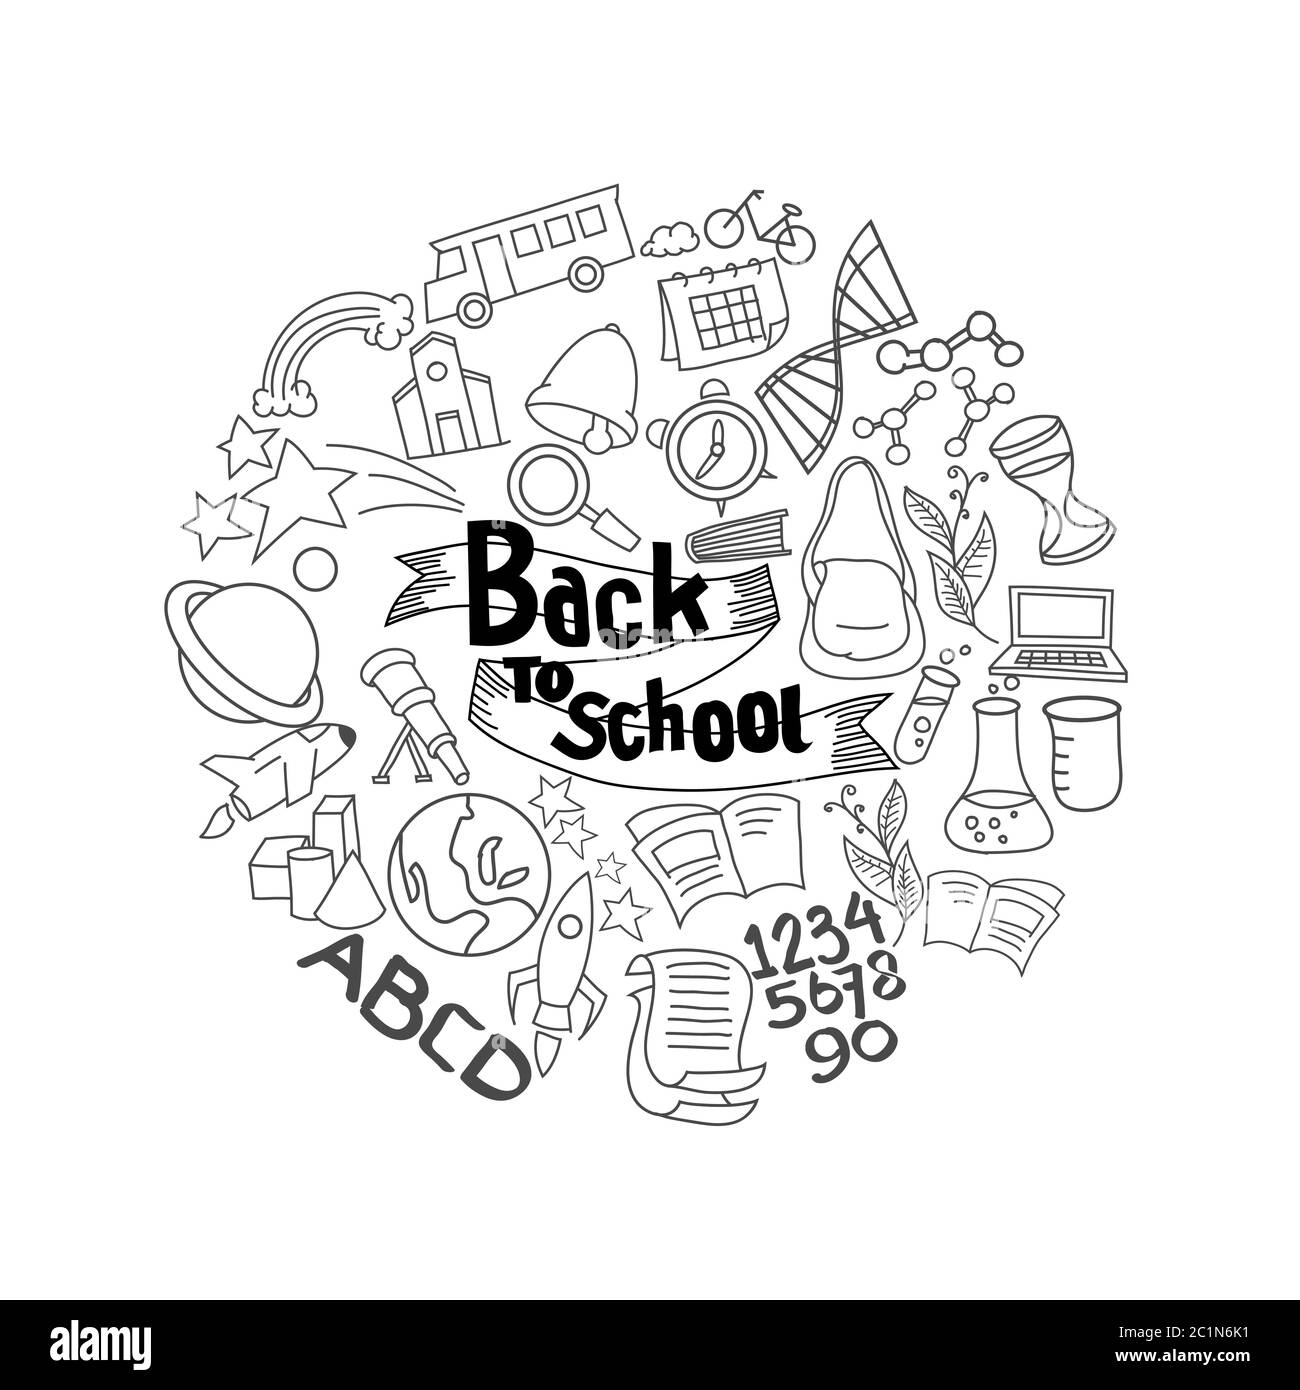 vector illustration of back to school activities suitable for educational theme. Hand drawn illustration of educational icon set Stock Vector